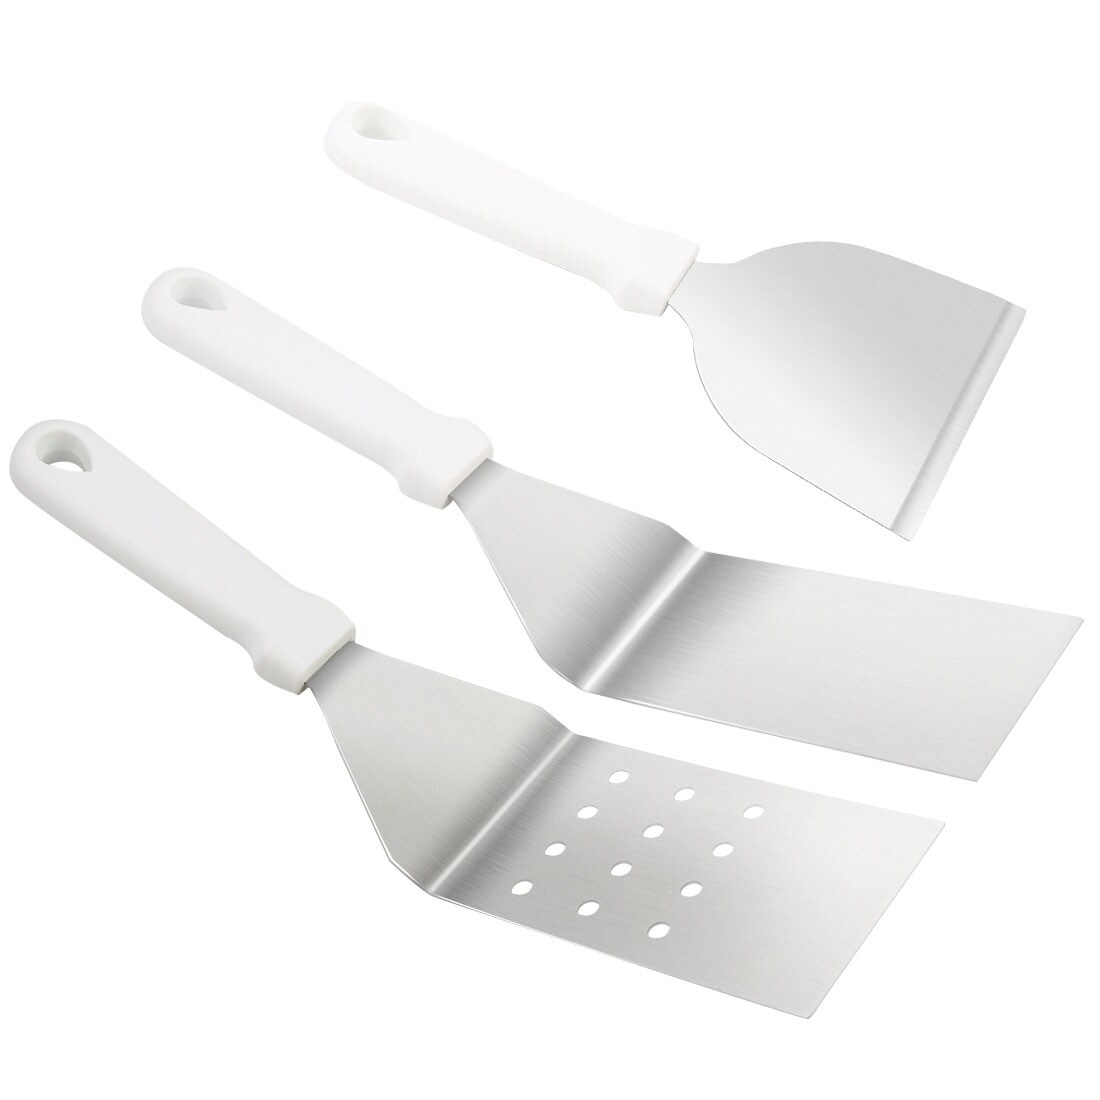 https://ak1.ostkcdn.com/images/products/is/images/direct/c3a5ab6dfee0ec48cf57b798538818f26a50eb4a/Griddle-Spatula-Cake-Pizza-Spatula-Cutter-Lasagna-Turner-Plastic-Handle-Baking-Utensils-Home-Wedding-Party-Serving-White-3pcs.jpg